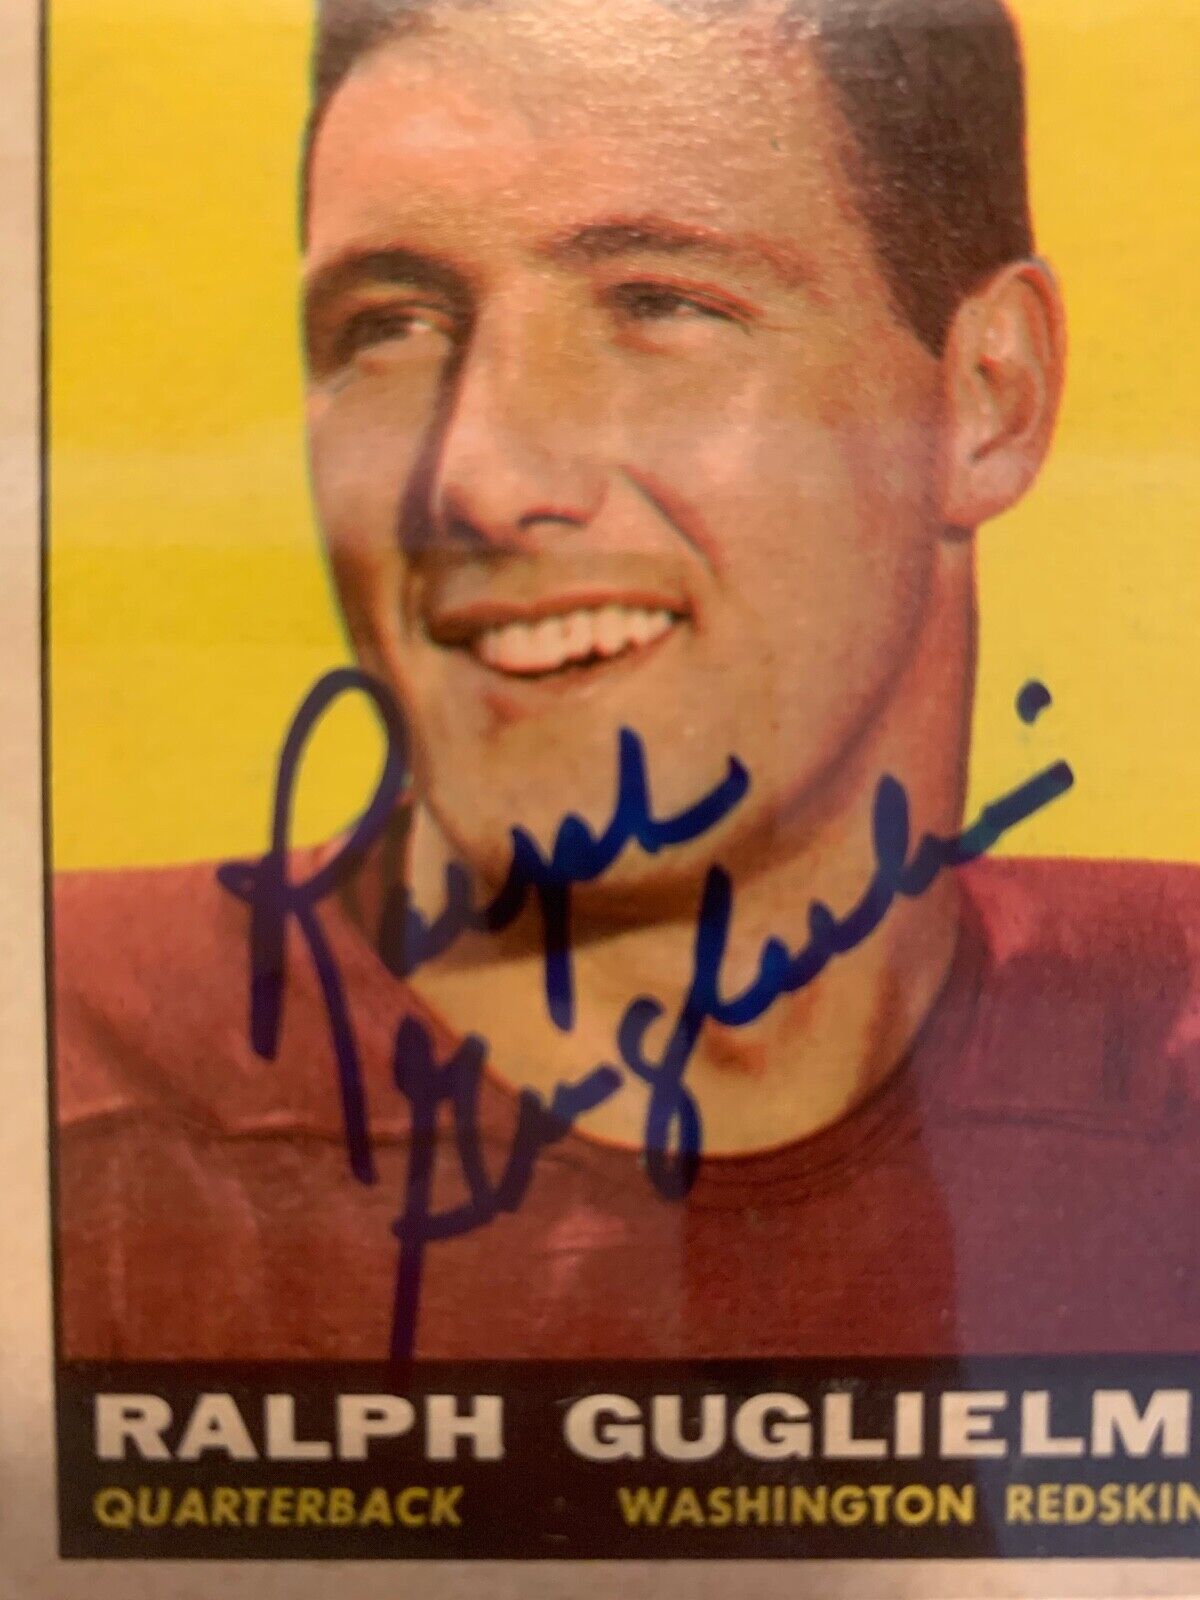 Ralph Gugliemi Redskins Autographed 1961 Topps Card PSA Certified & Slabbed